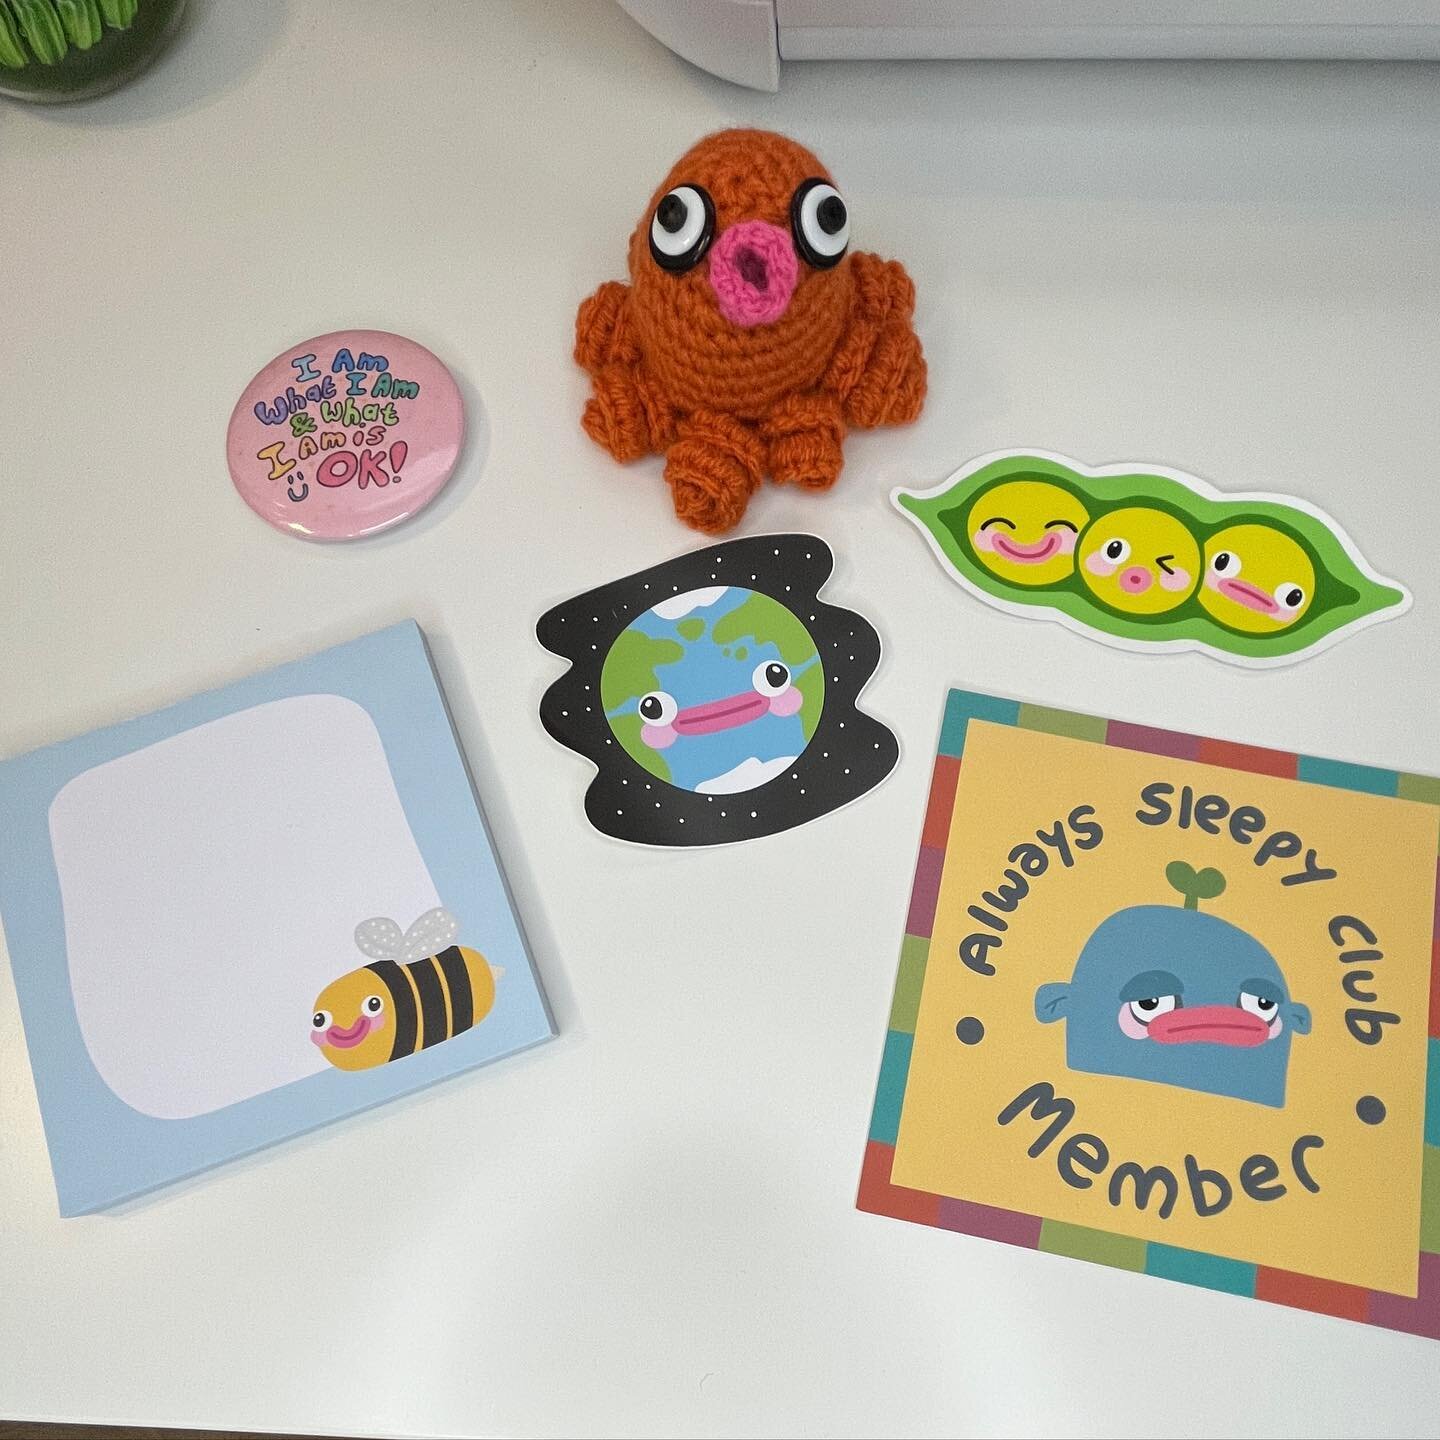 Last new item before the update - promise 😅 Mystery Boxes! You get a mini amigurumi, 2 vinyl stickers, a postcard, notepad and 2 badges - all picked at random. They&rsquo;re gonna be &pound;10 plus shipping - so you&rsquo;re making a saving overall!